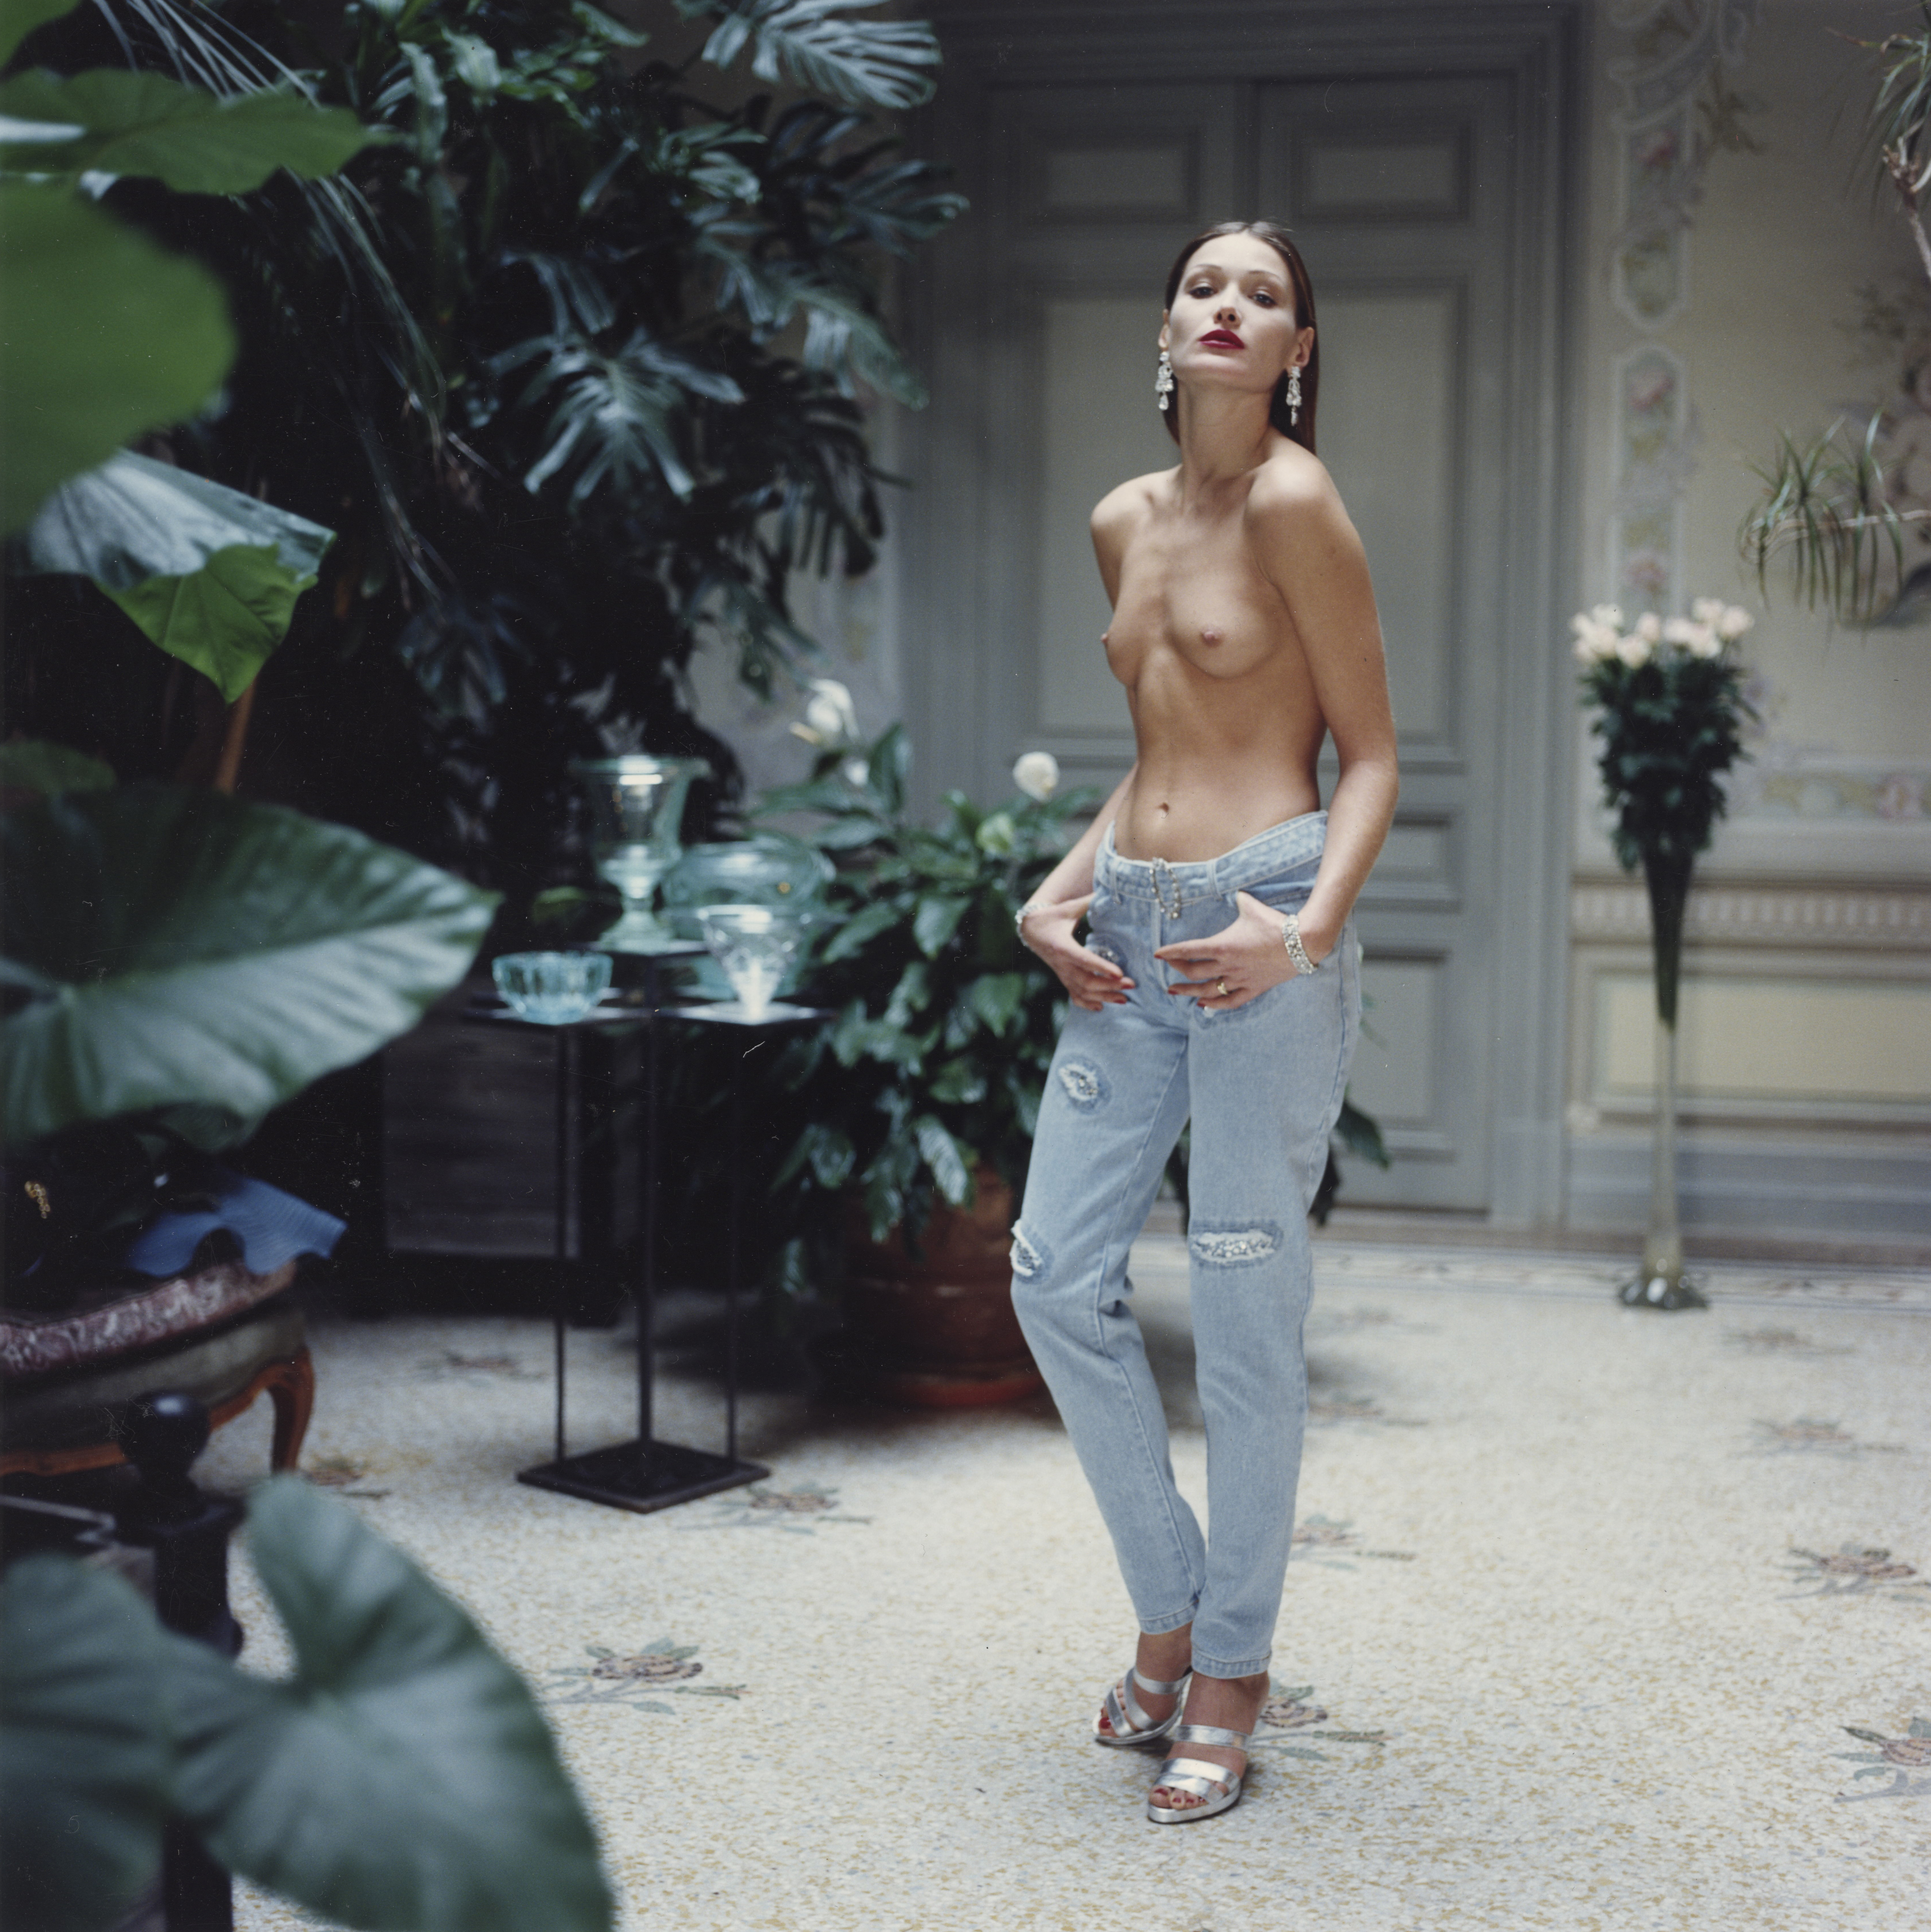 a woman wearing jeans, heels and no top with lots of plants around her